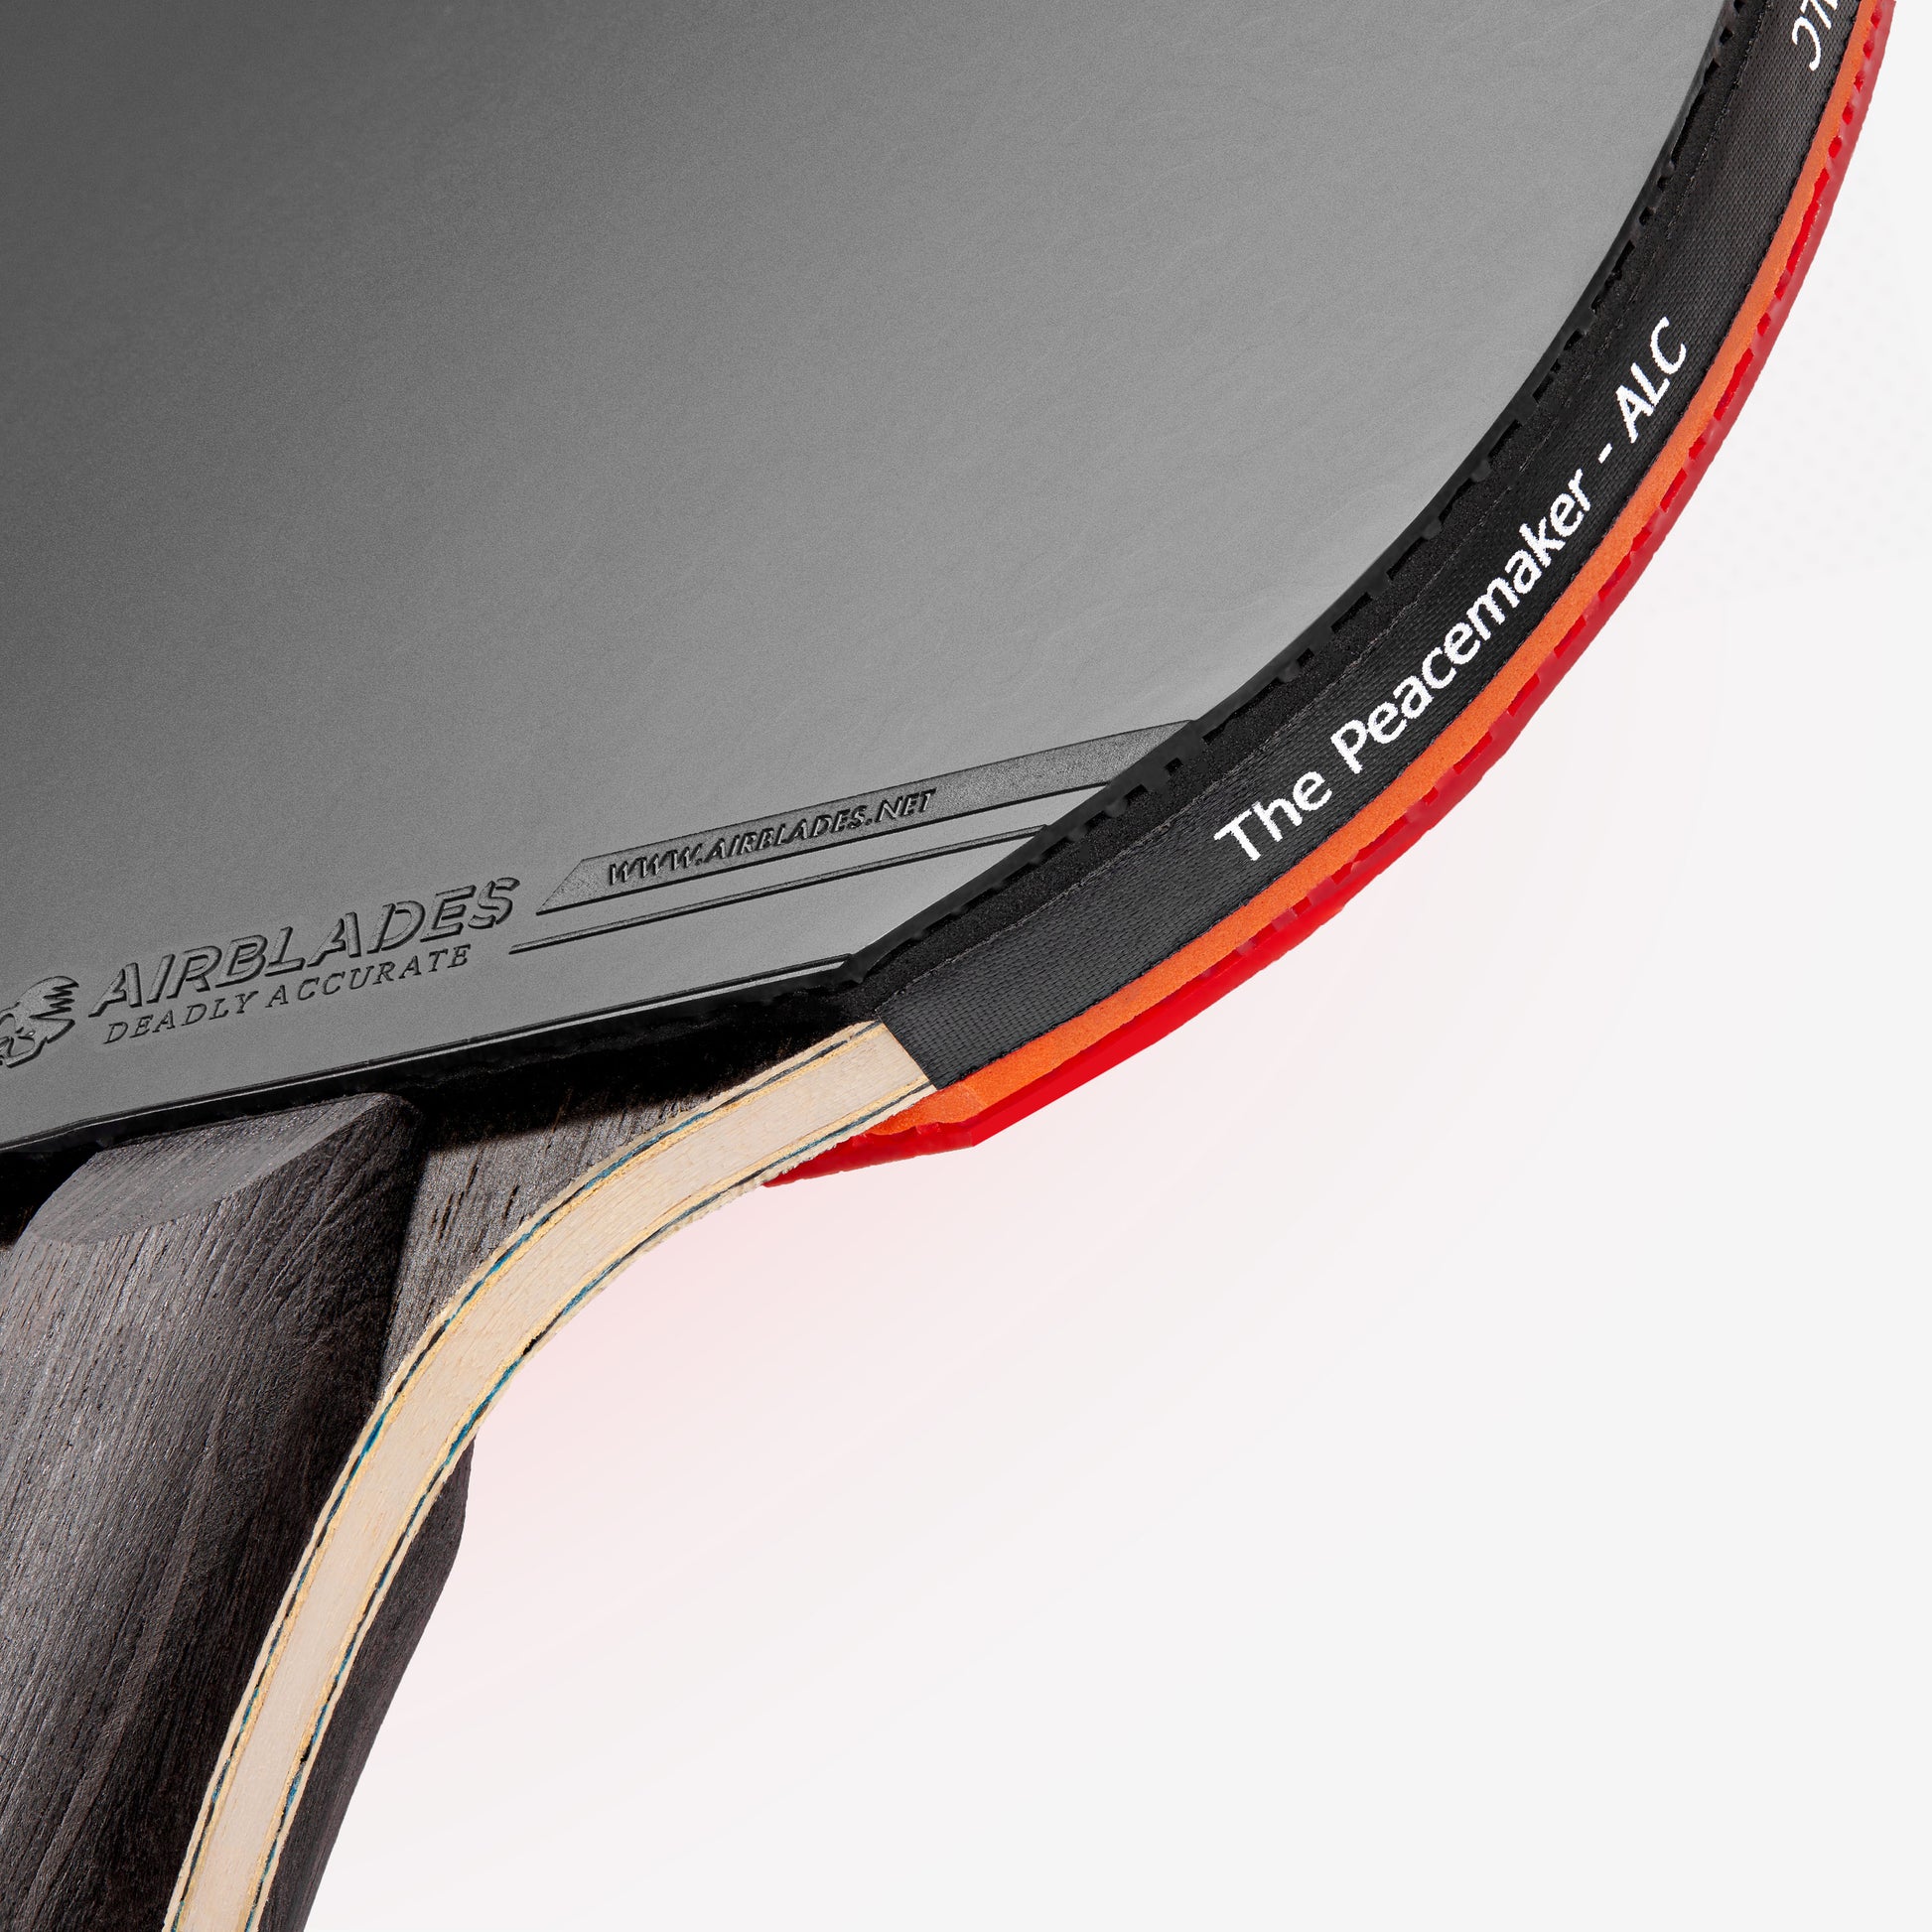 Close Up of the AirBlades Peacemaker table tennis paddle with 7 layers